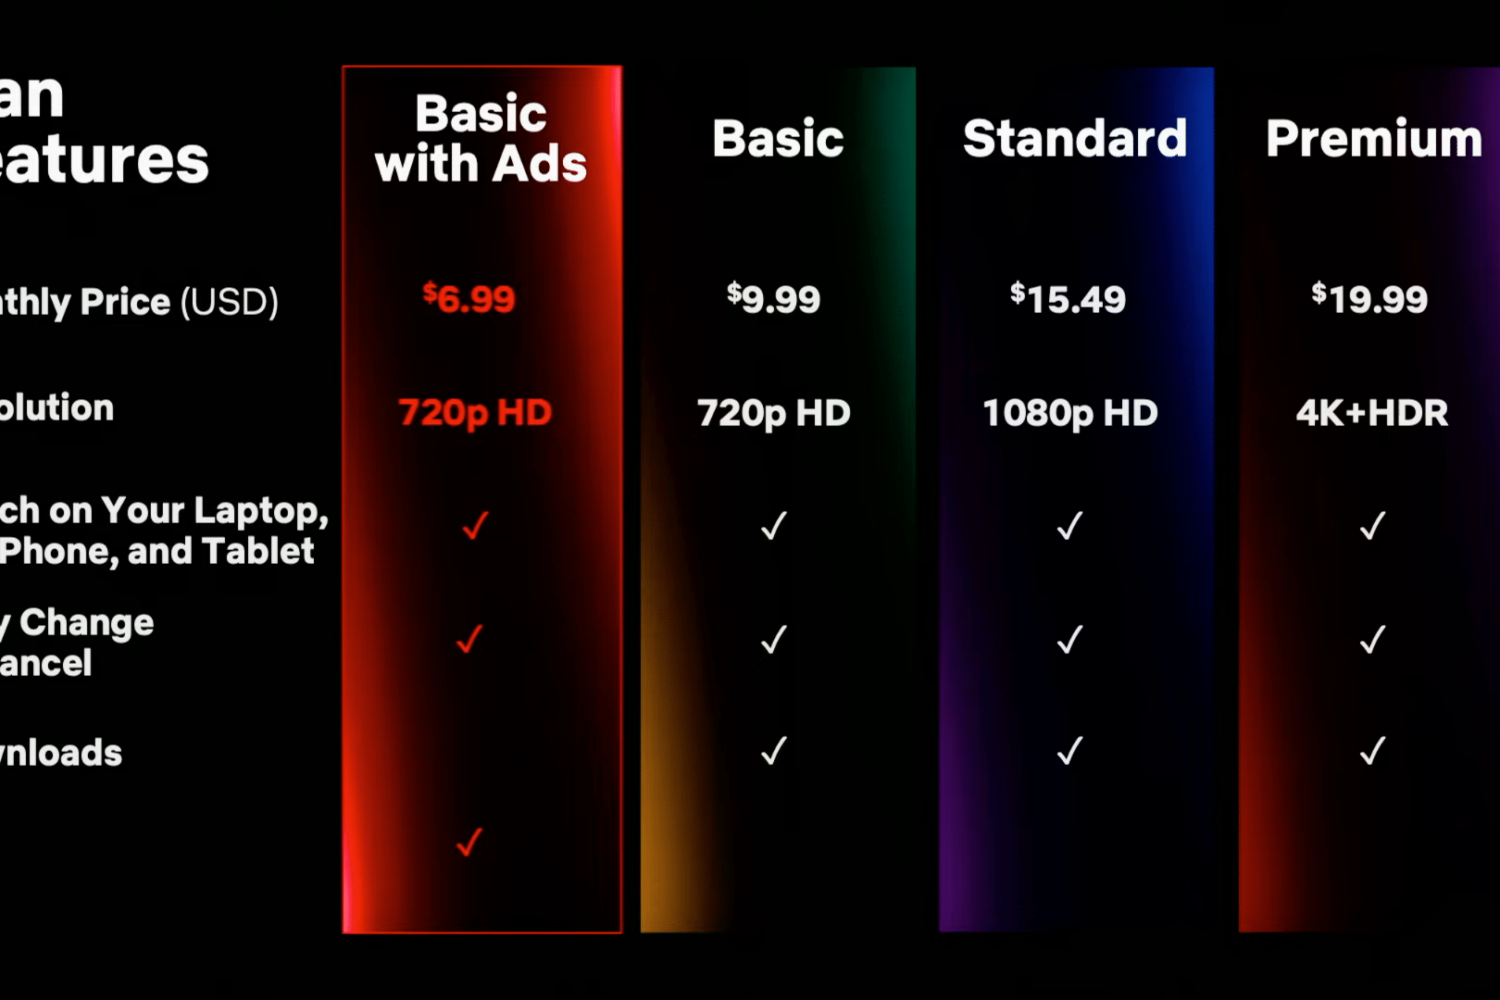 A table comparing the features and pricing of Netflix's plans: Basic with Ads, Basic, Standard and Premium